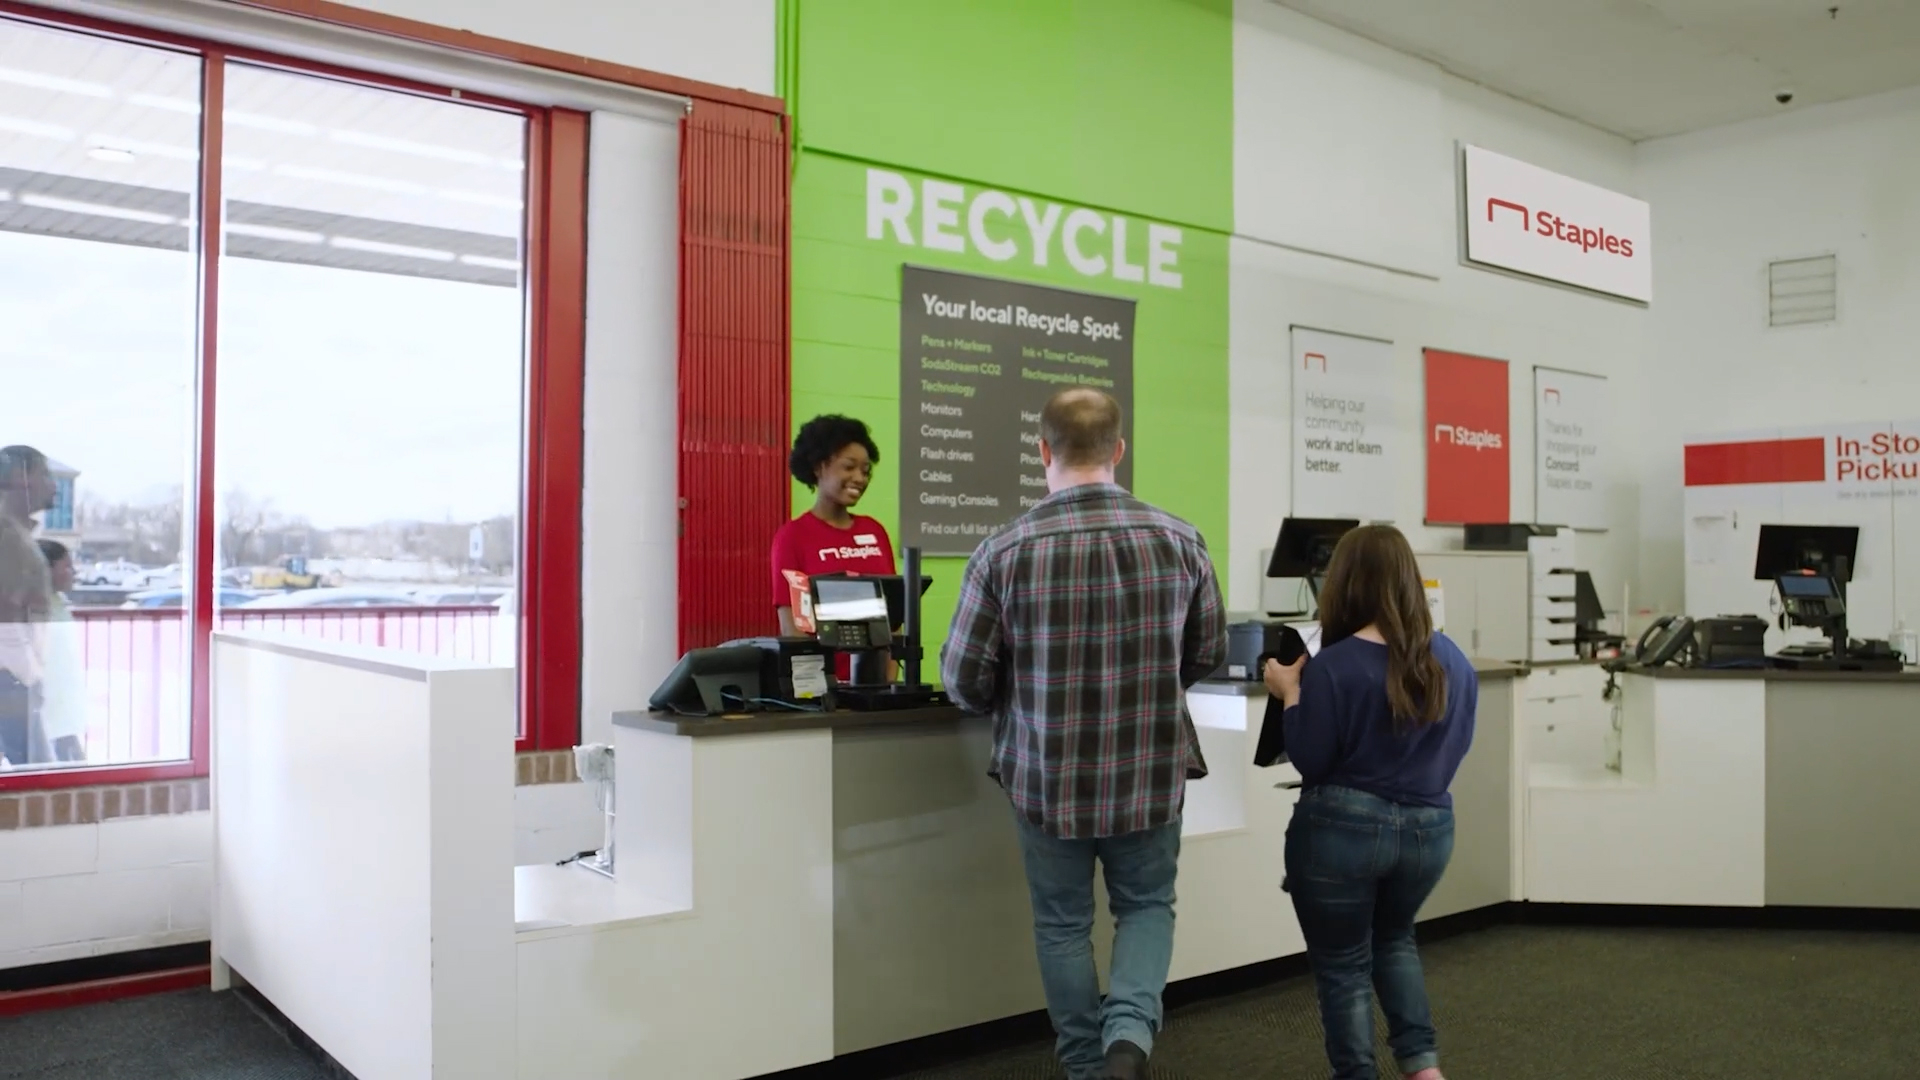 It's Recycling Day Every Day at Staples. Best of all, it's free to recycle every day in every Staples store.